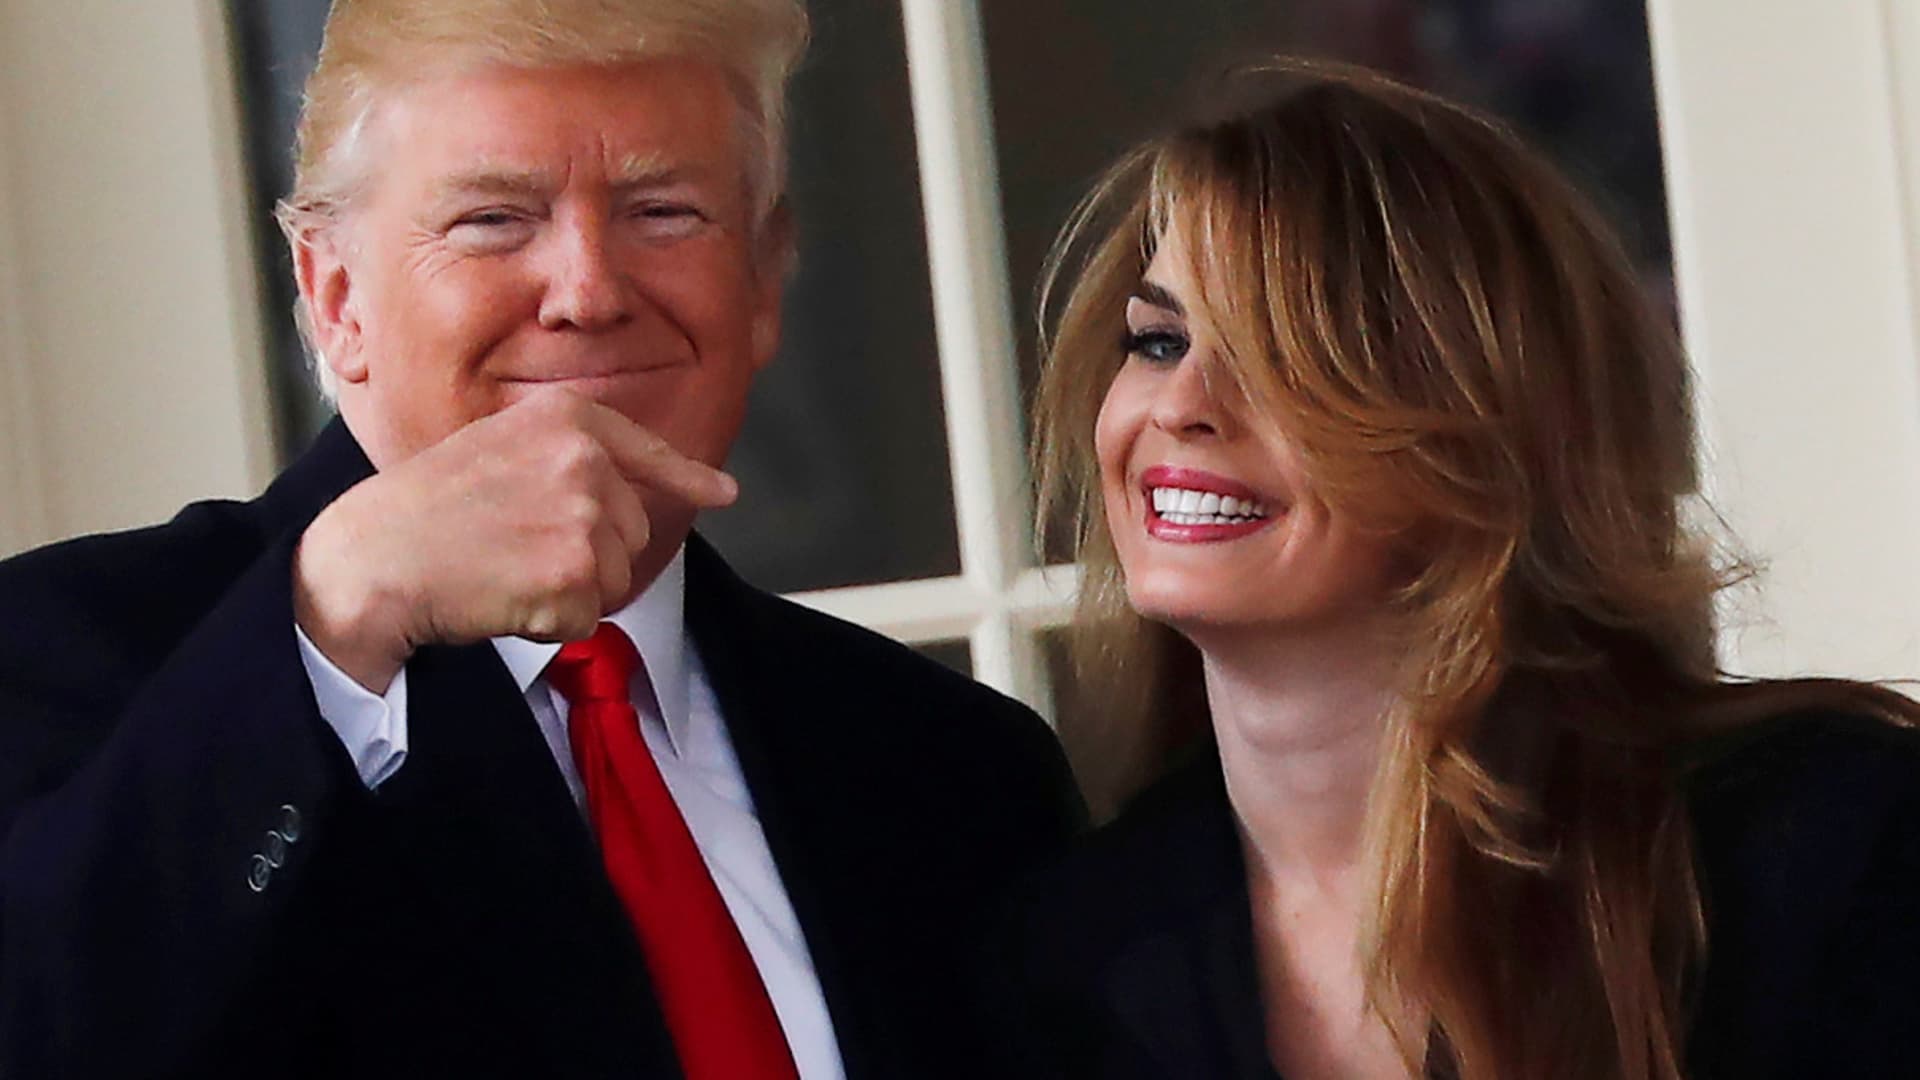 Former top aide Hope Hicks cries as cross-examination begins [Video]